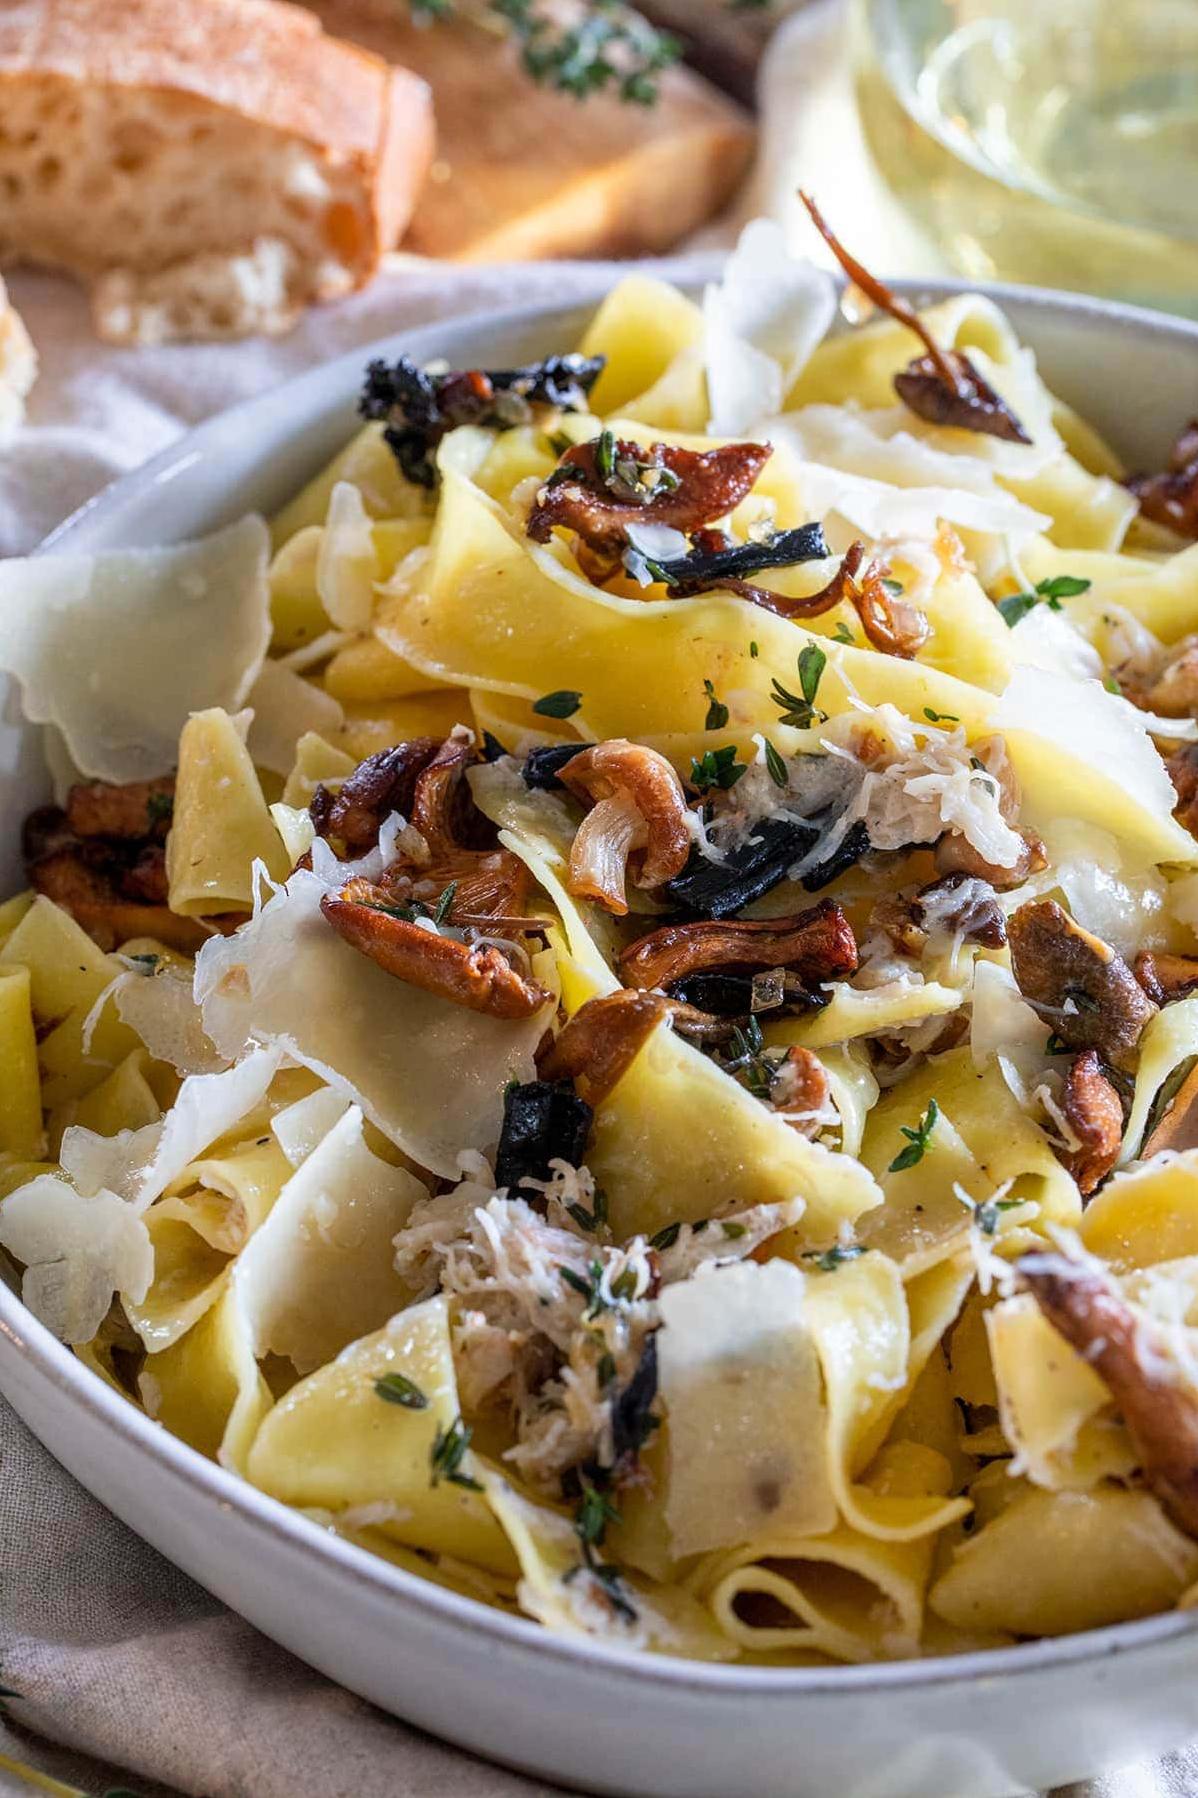  A mouthwatering medley of crabmeat, mushrooms, and wine sauce.